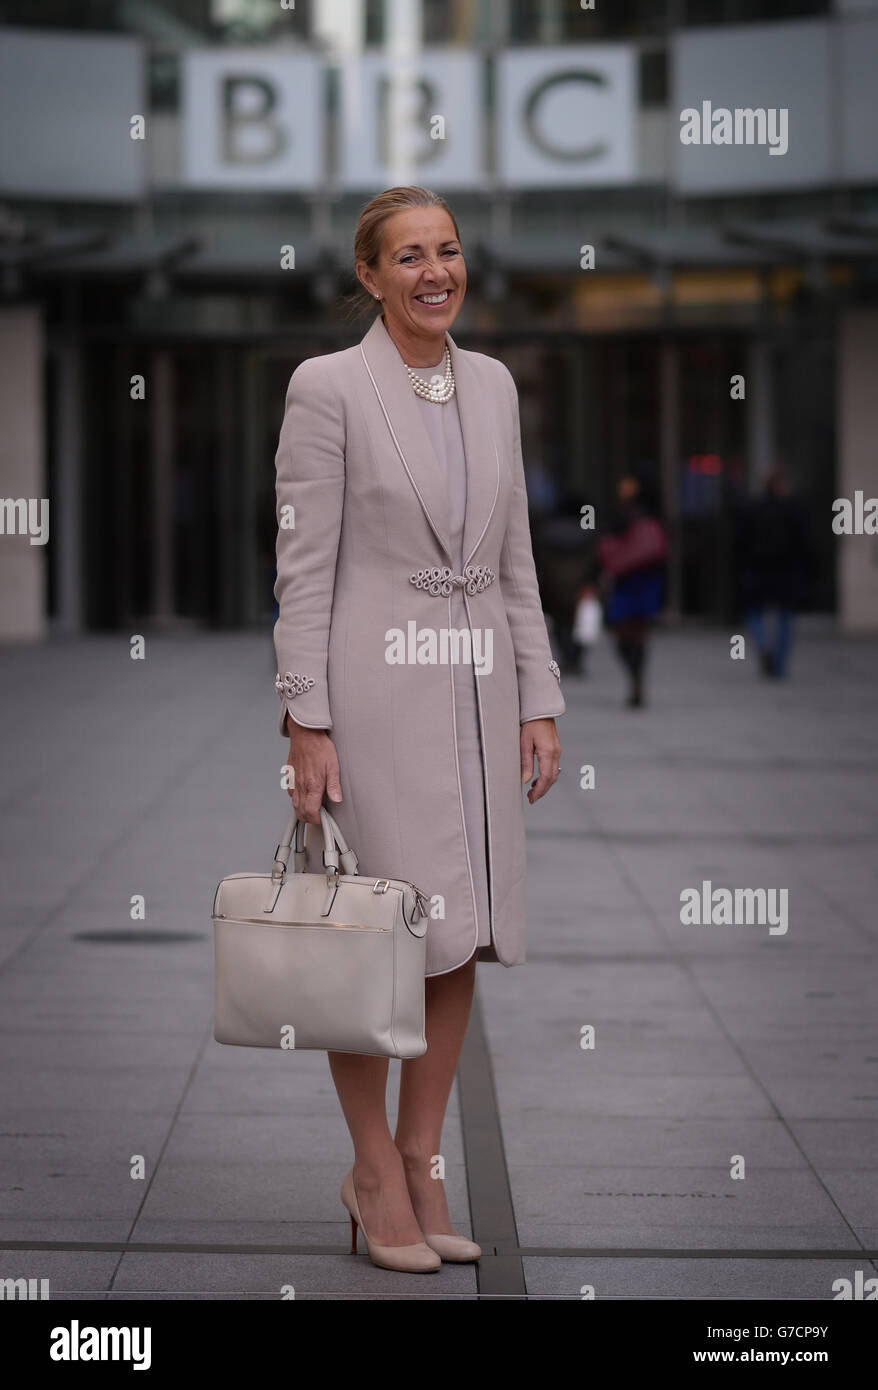 Rona Fairhead, the newly appointed Chairman of the BBC Trust arrives at the BBC's New Broadcasting House, London. Stock Photo